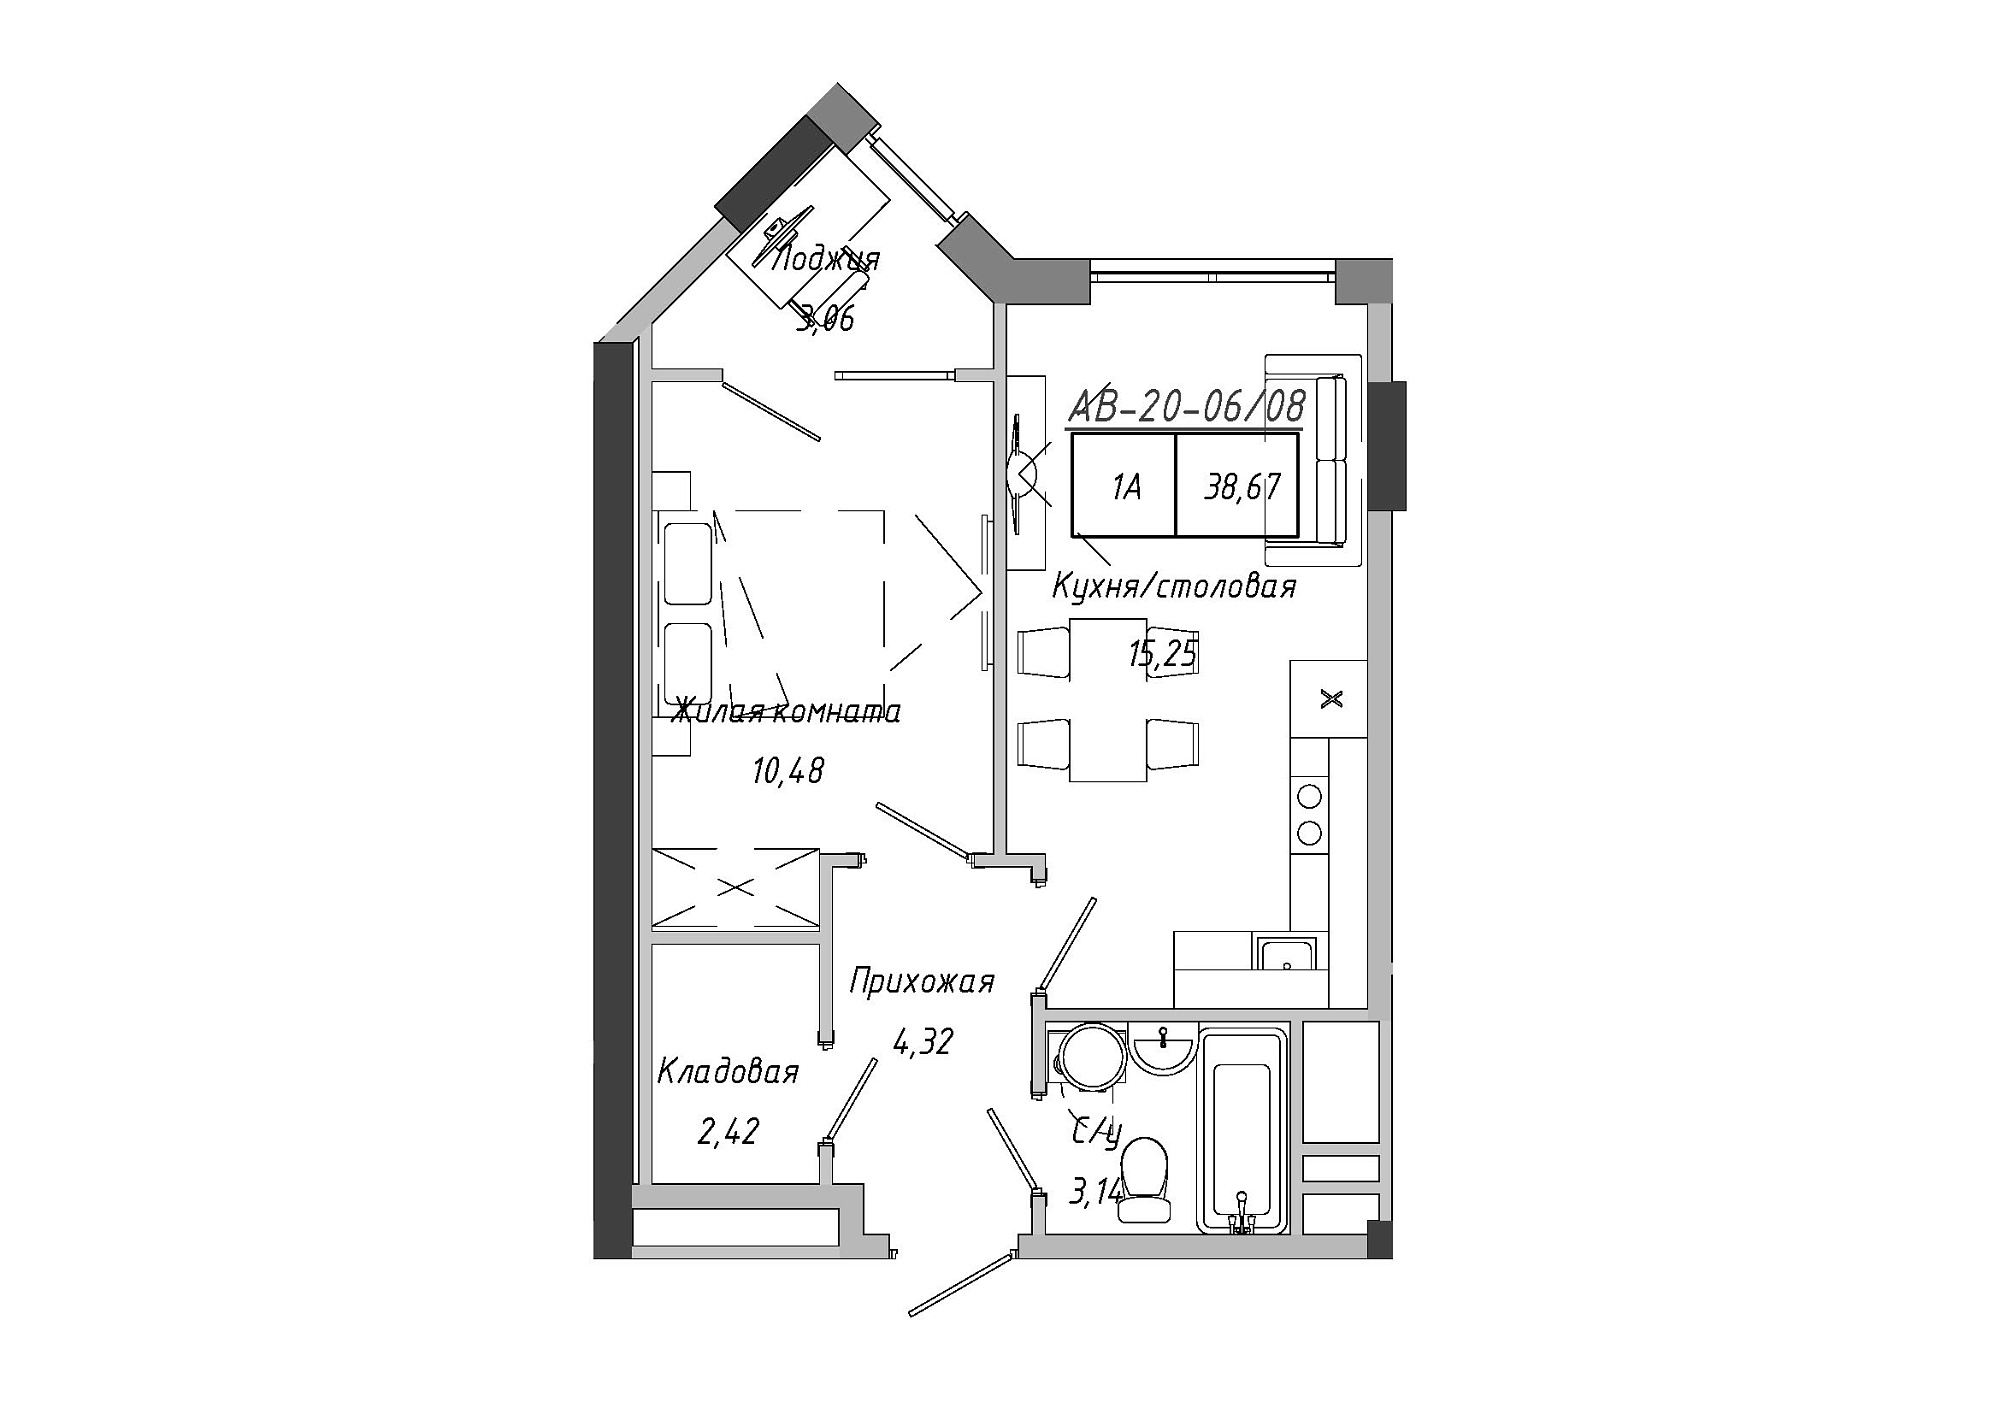 Planning 1-rm flats area 38.85m2, AB-20-06/00008.